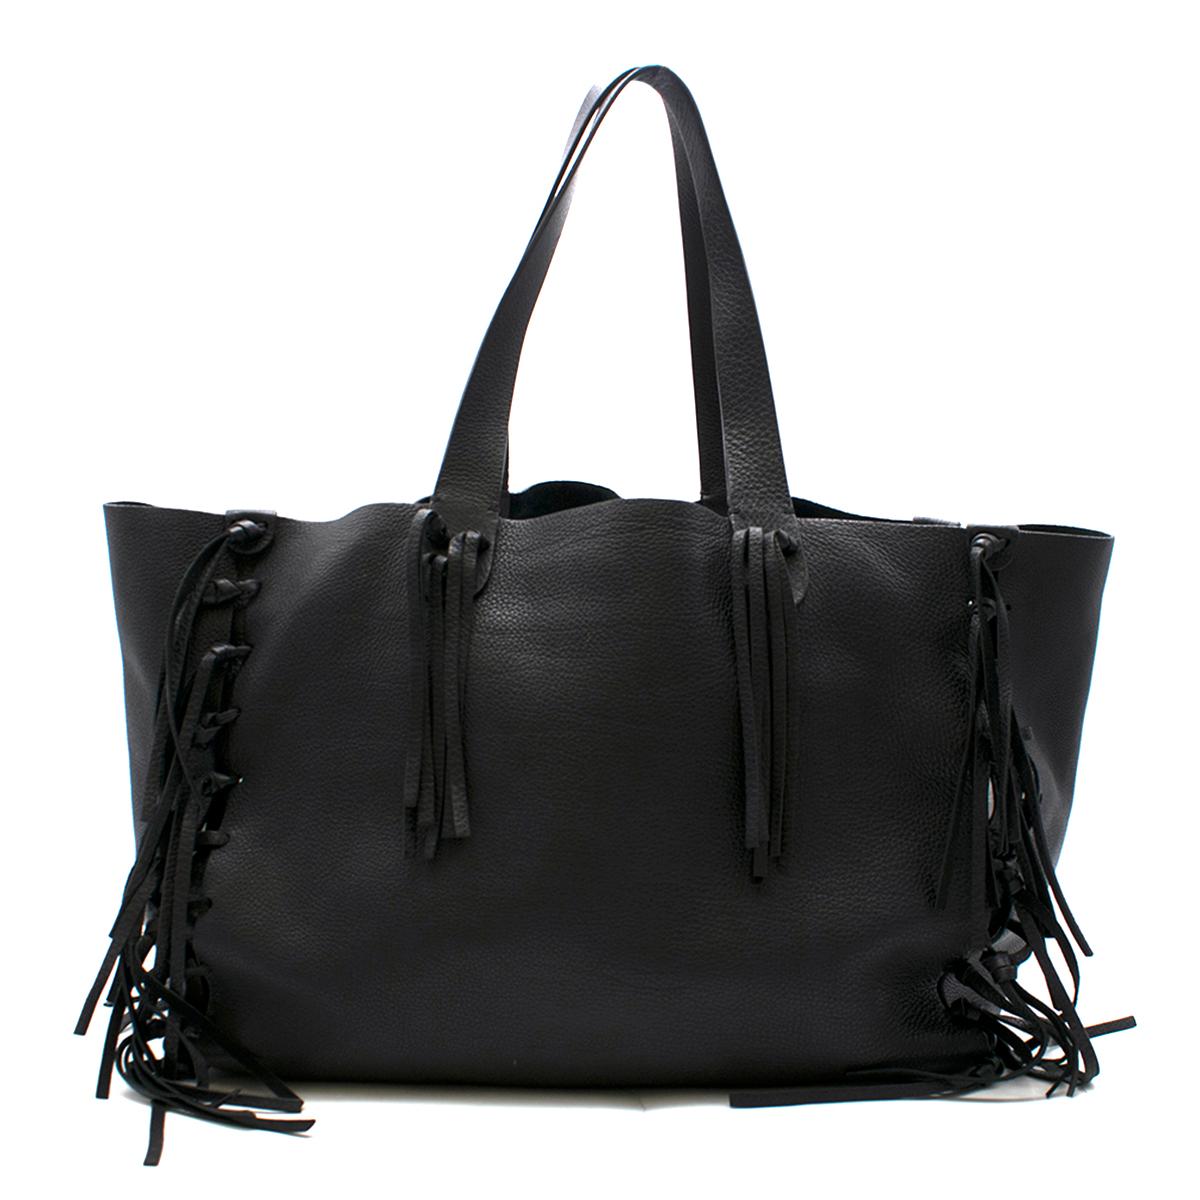 Valentino Black C-Rockee Fringe Leather Tote Bag

- Black leather tote bag
- Mid-weight
- Flat shoulder straps with tassel fringe bases
- Fringe detail trims sides of spacious body
- Suede lining
- Internal two zip pockets and two open pockets
-